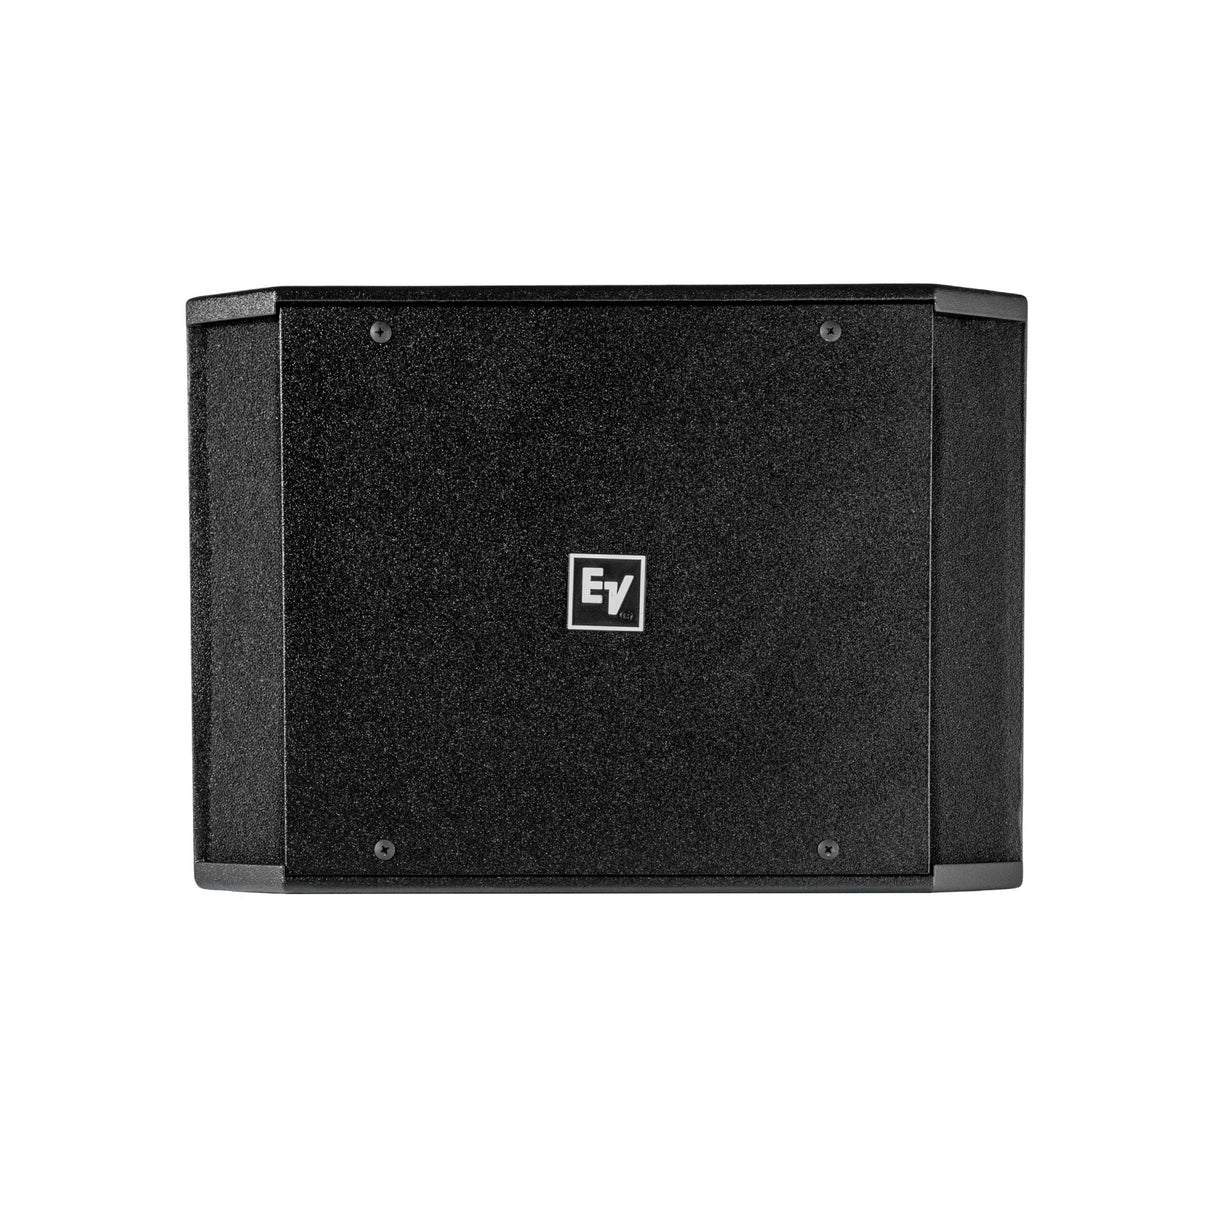 Electro-Voice EVID-S10.1DB 2 x 10 Inch Subwoofer Cabinet, Black